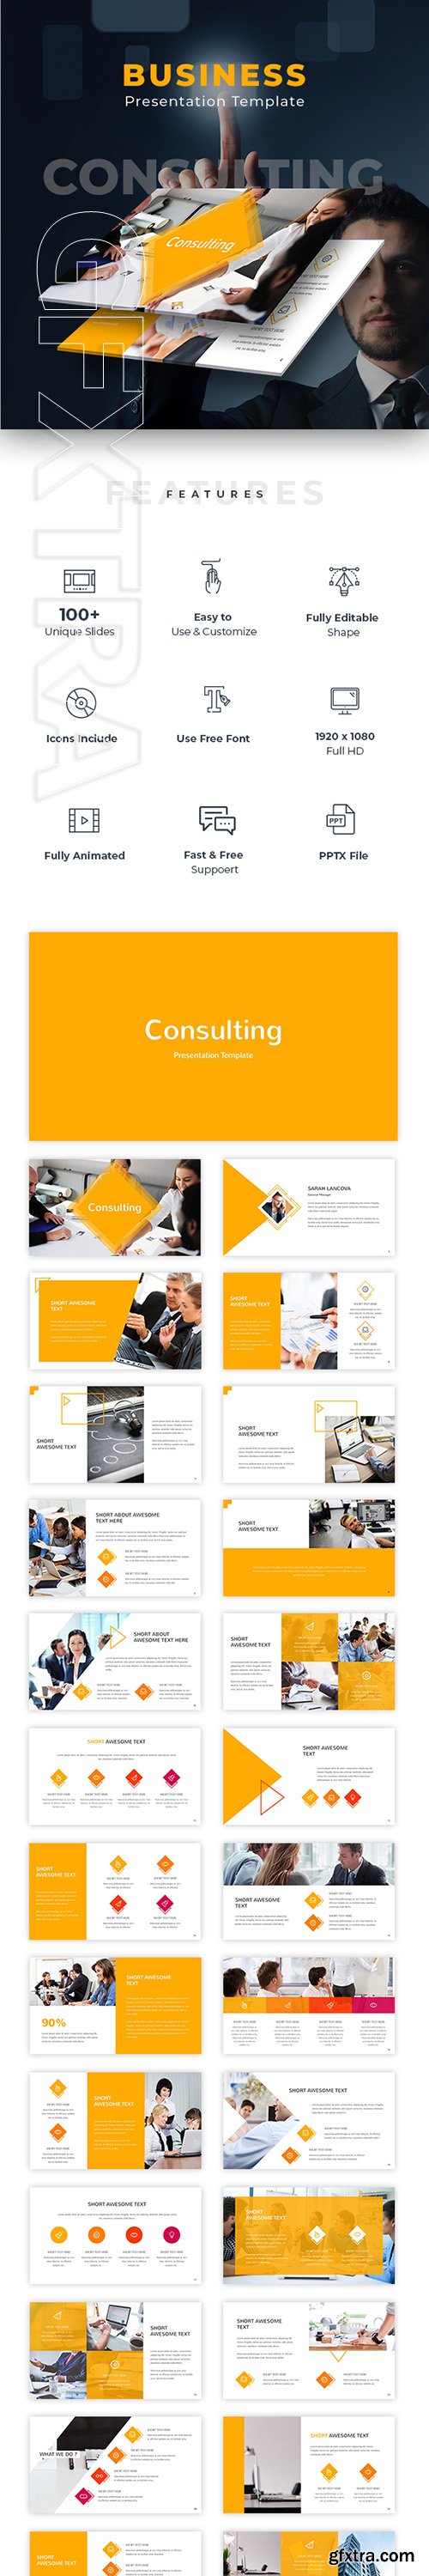 GraphicRiver - Business Consulting Powerpoint 22597797